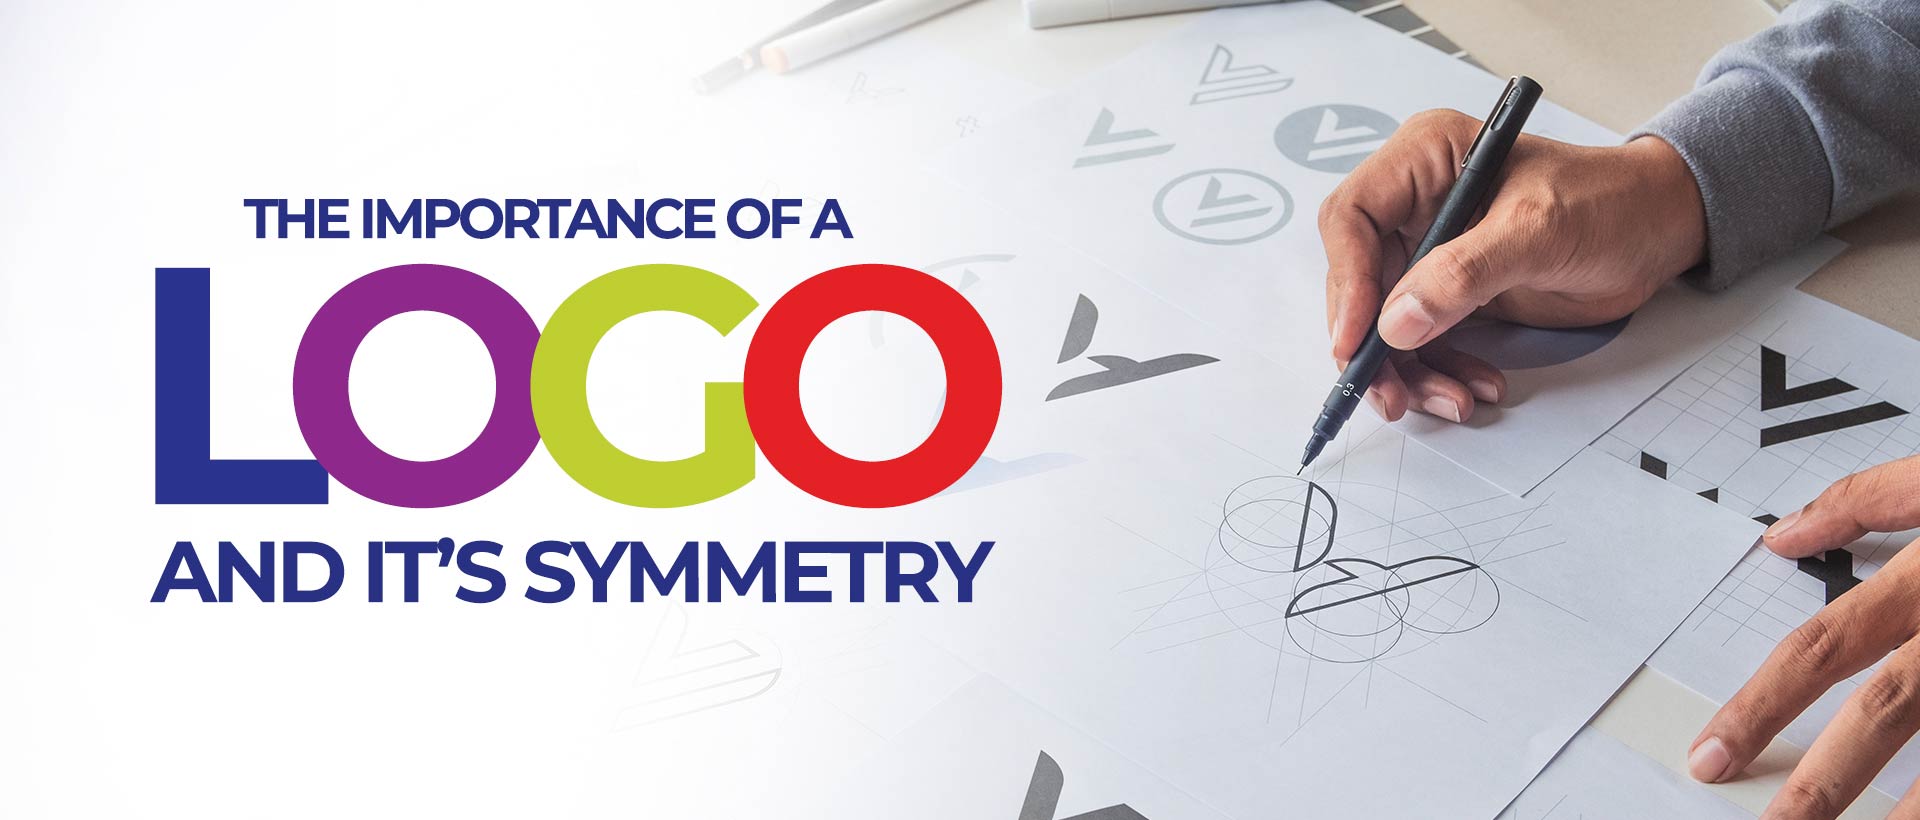 The Importance of a logo and it’s symmetry